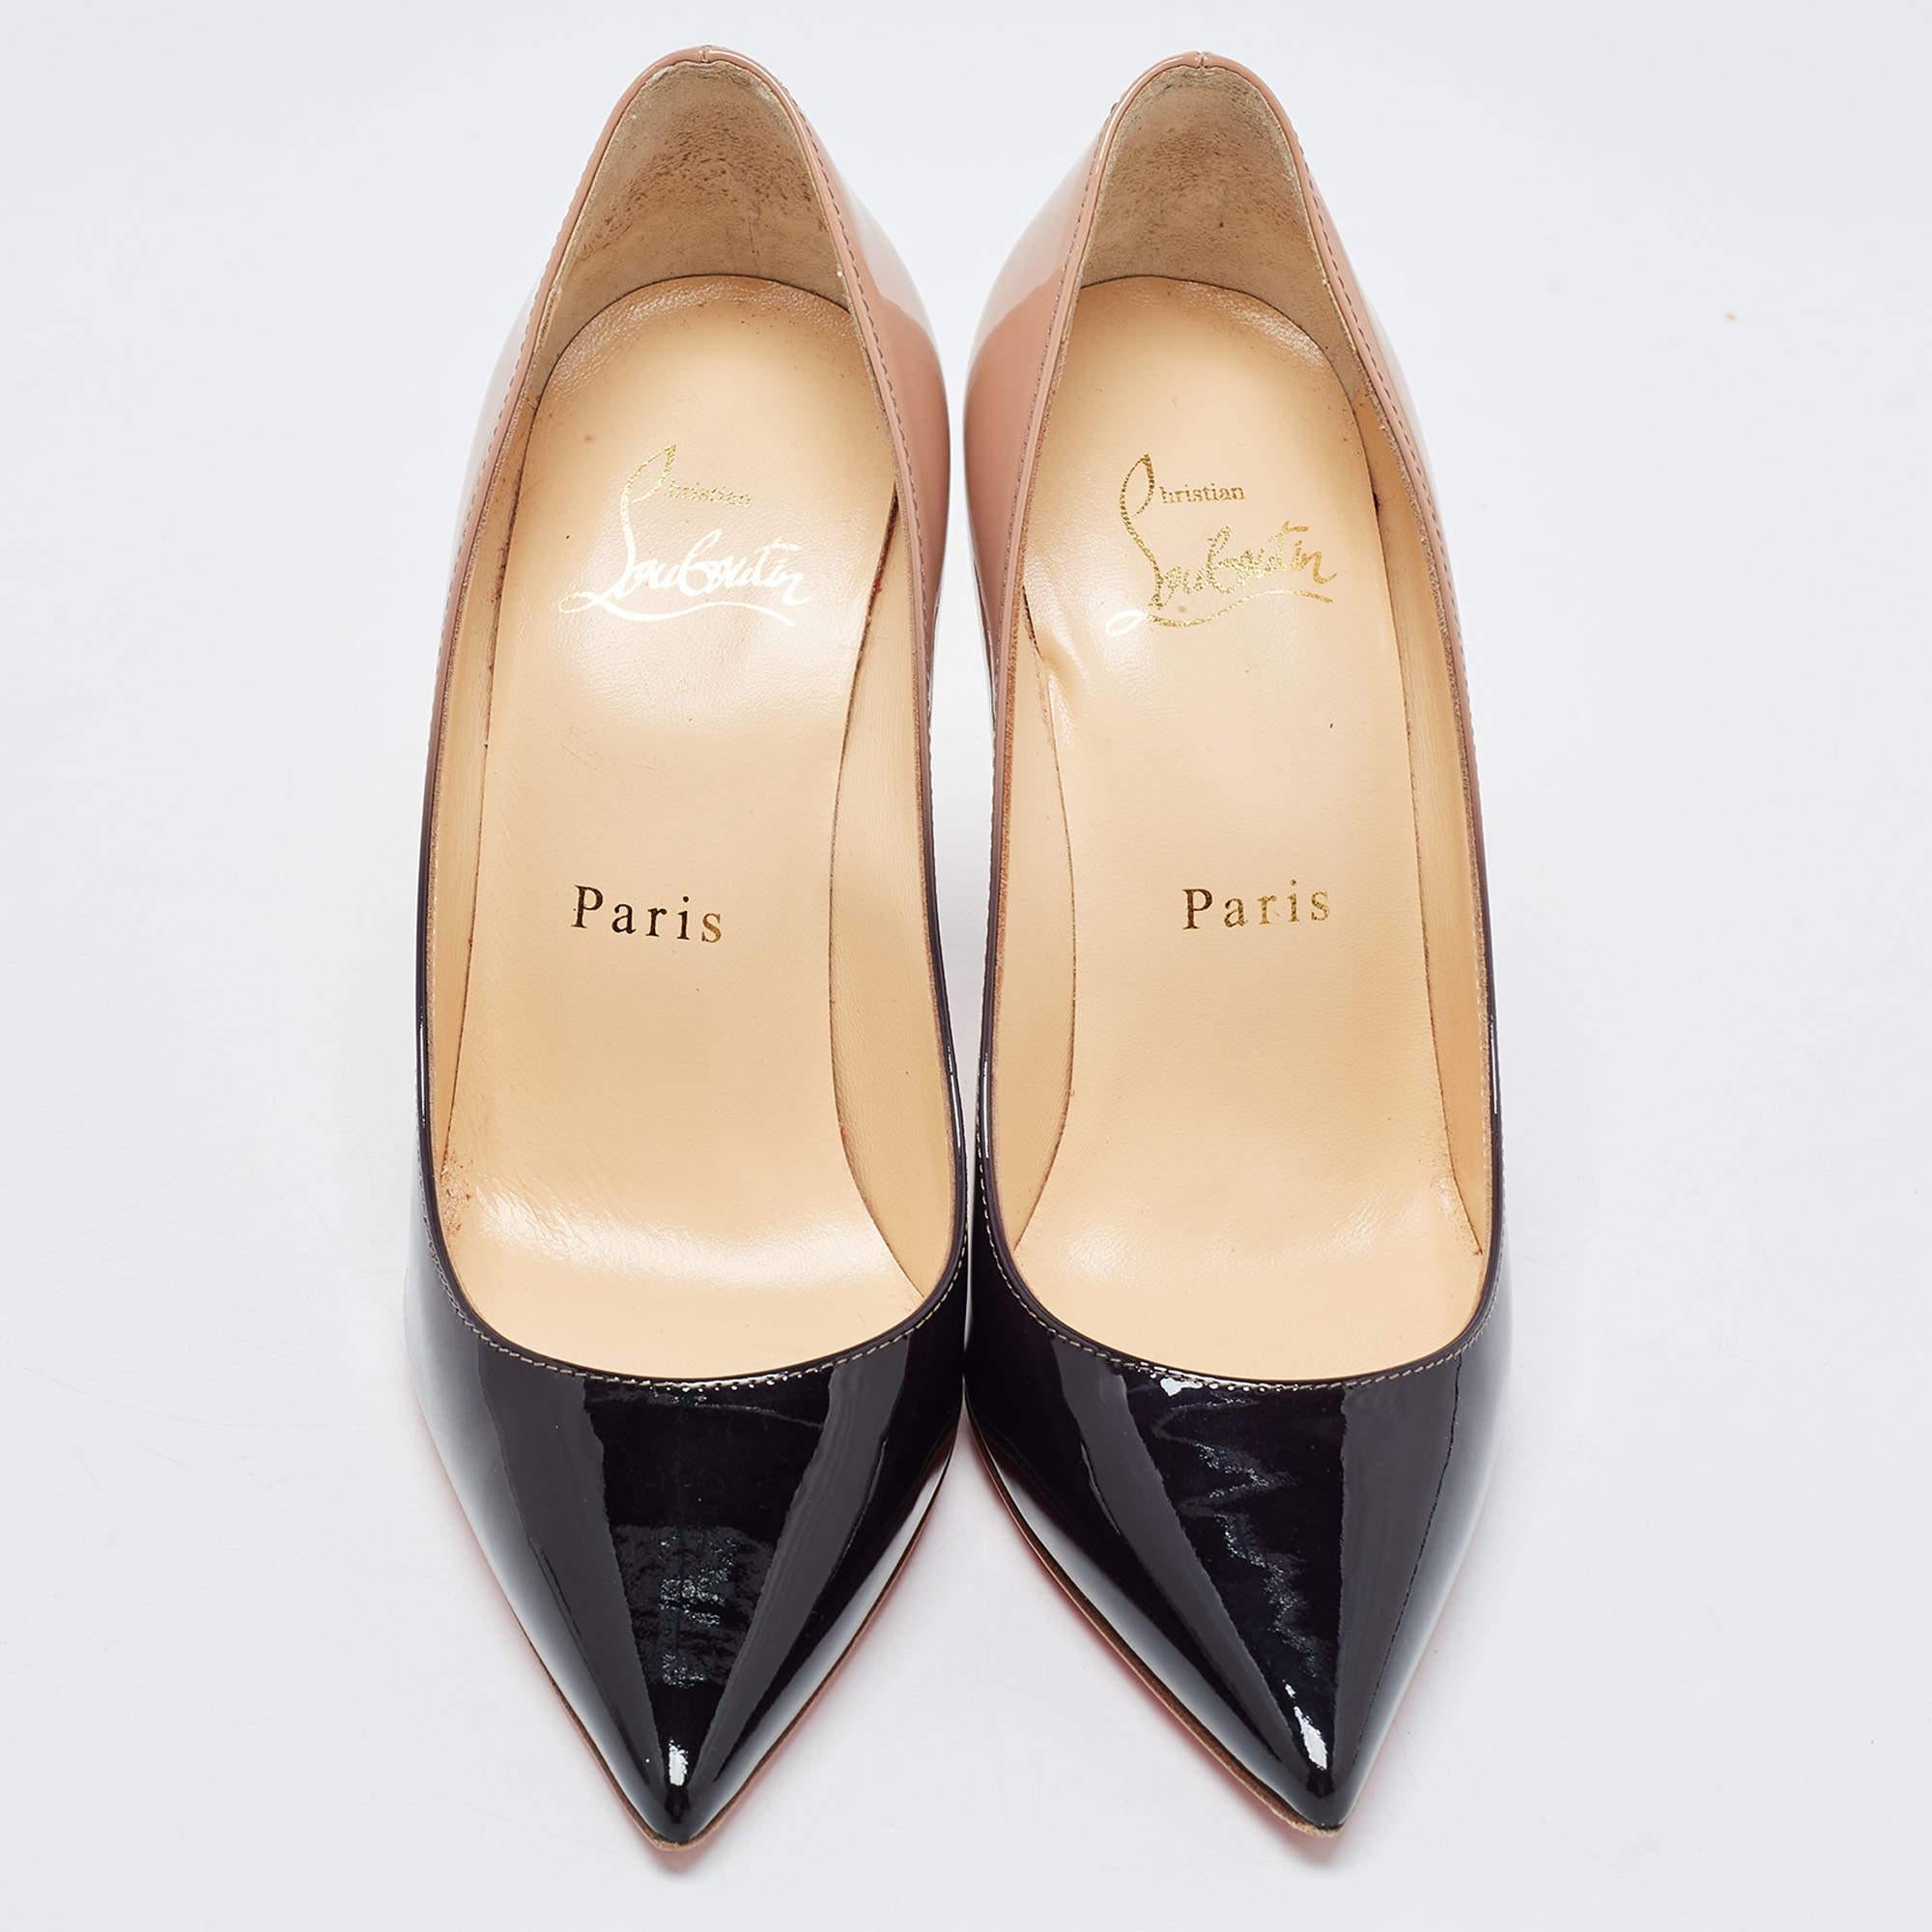 Stride through the day with confidence by adorning this pair of Christian Louboutin pumps. Created from patent leather, its well-designed curves will elegantly outline your feet. The 10cm heels and platforms of these pointed shoes will take your